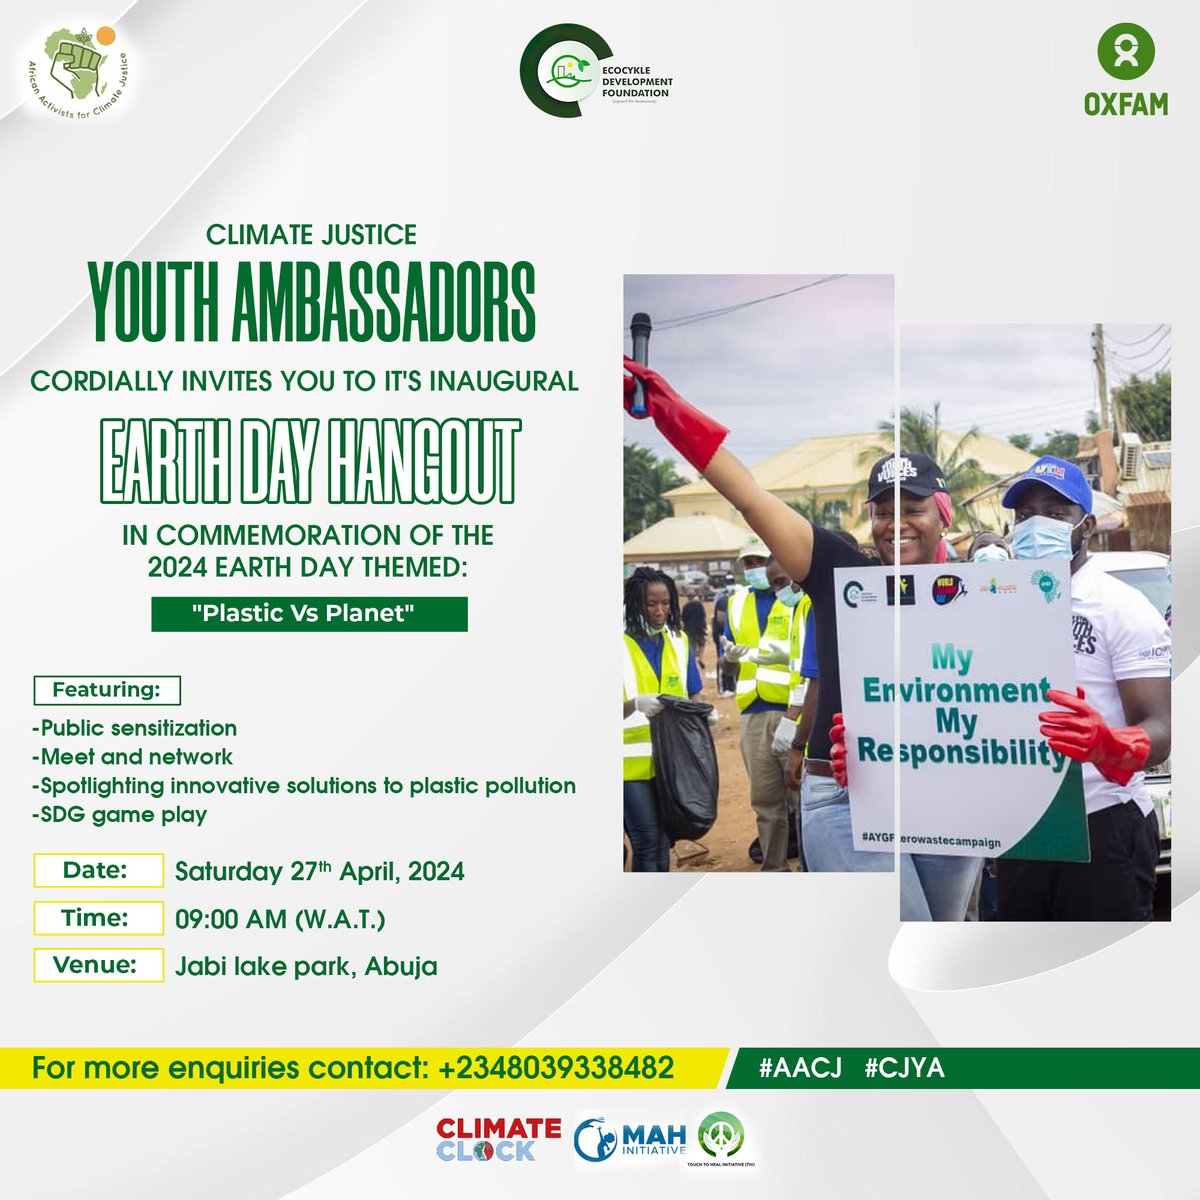 Ecocykle partners with Climate Justice Youth Ambassadors (CJYA, @oxfaminnigeria, @aacjinaction and @theclimateclock to organize the inaugural #EarthDay2024 hangout themed #PlanetVsPlastics Kindly register: forms.gle/H4tk1K9WDUTLRm… #EarthdayEveryday #CJYA #AACJ